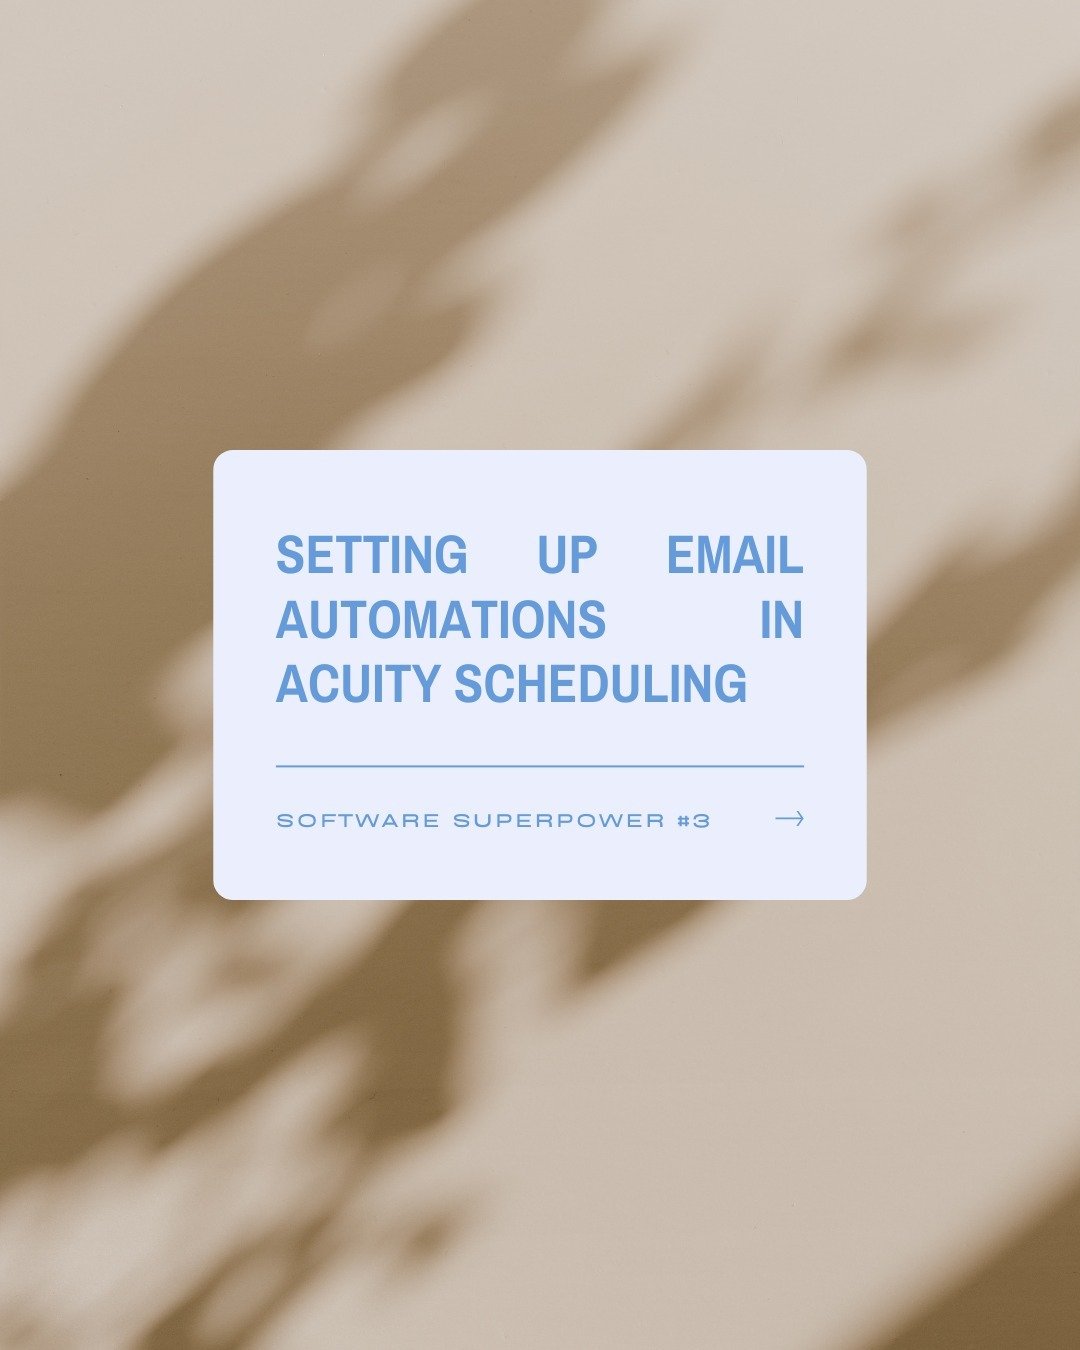 Acuity Superpower #3 - You can connect multiple email addresses to each team member&rsquo;s calendar and setup a range of automated emails.⁣
⁣
We needed to be able to include multiple email addresses for each designer and were SO happy to find that w